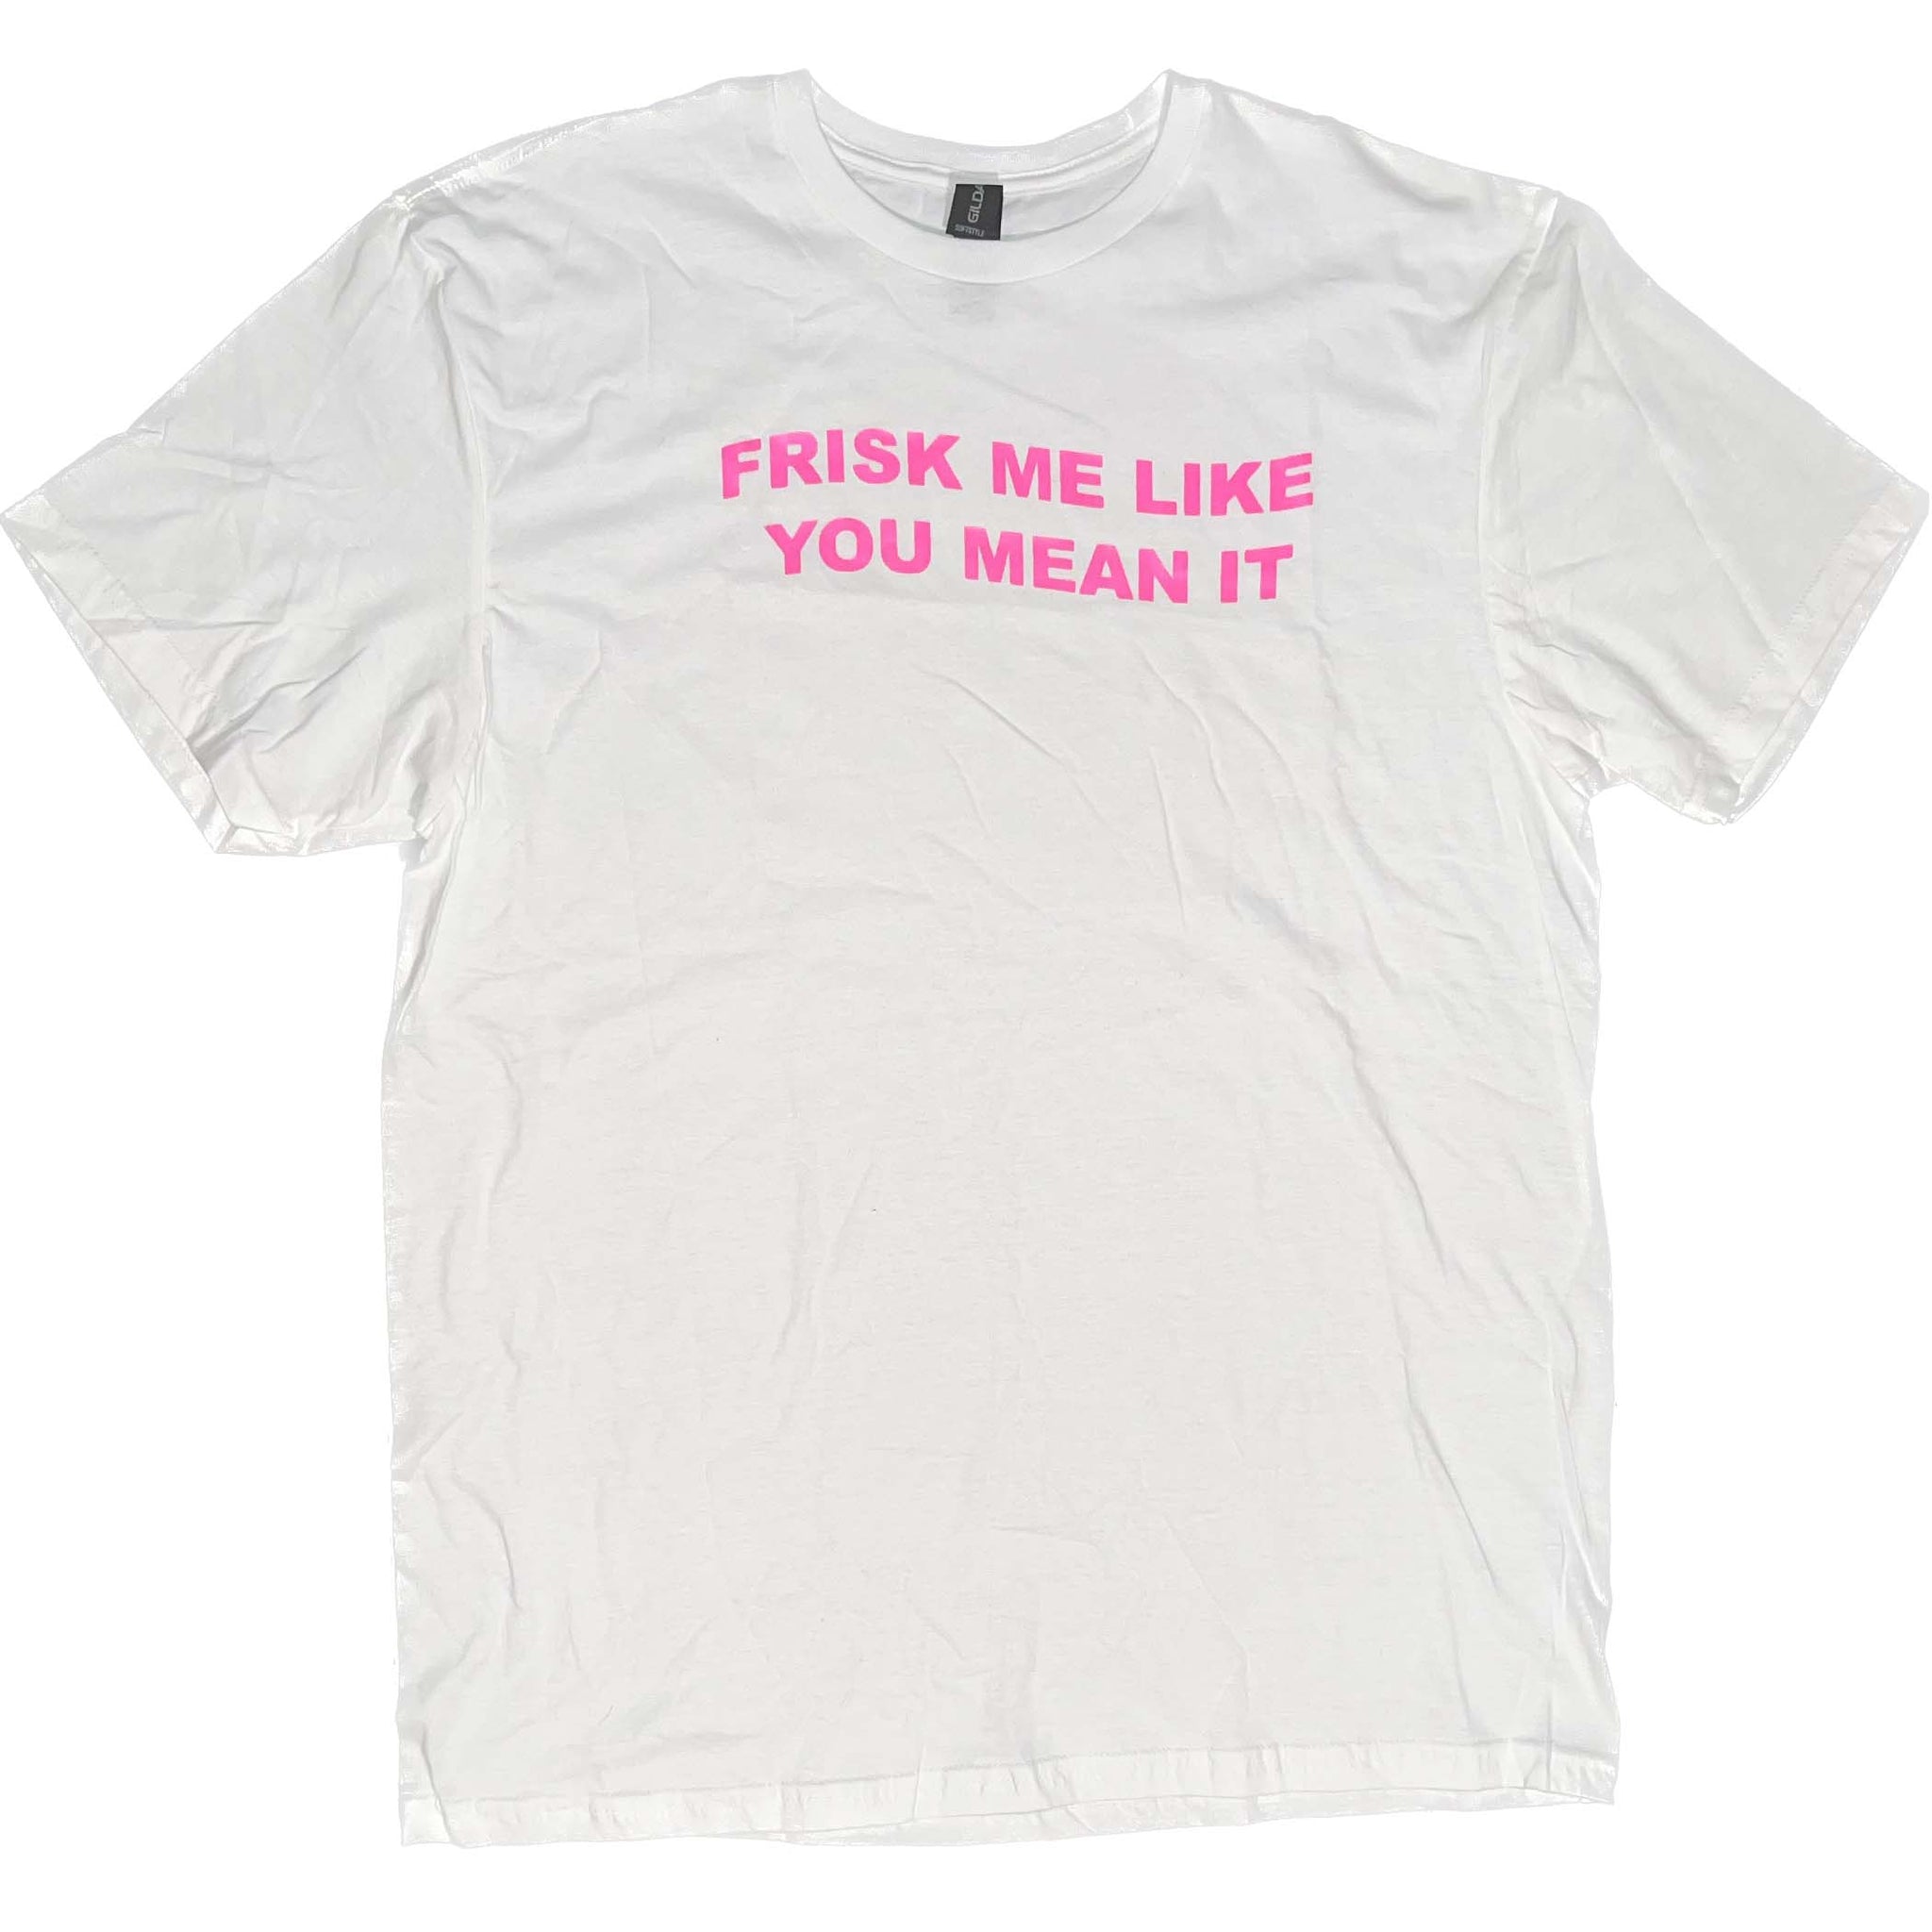 FRISK ME LIKE YOU MEAN IT T-SHIRT